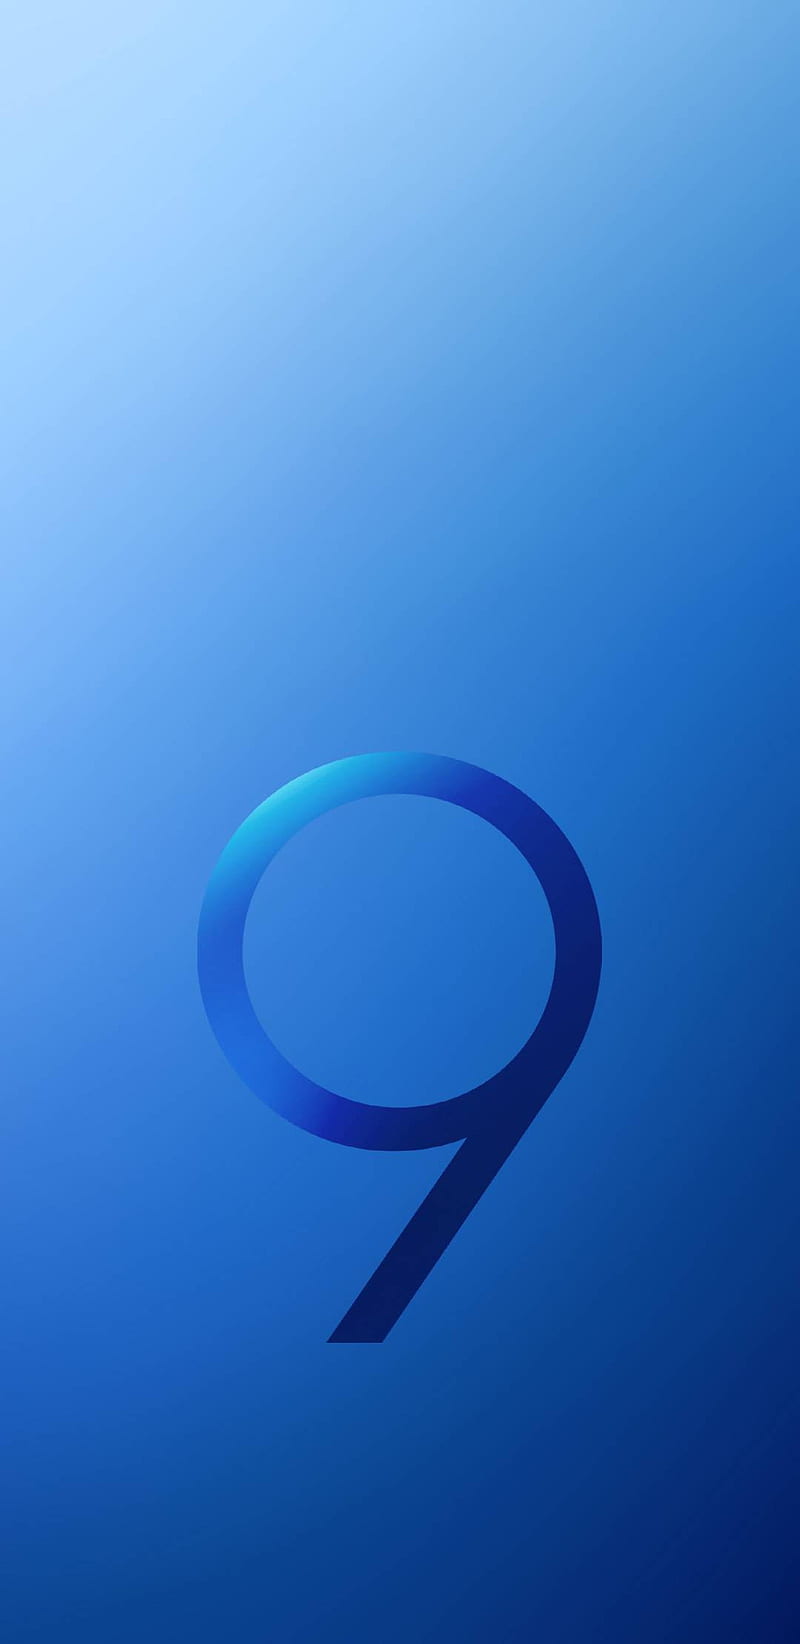 Galaxy s9, blue, galaxy, note, official, phone, plus, s9, s9 plus, samsung, HD phone wallpaper